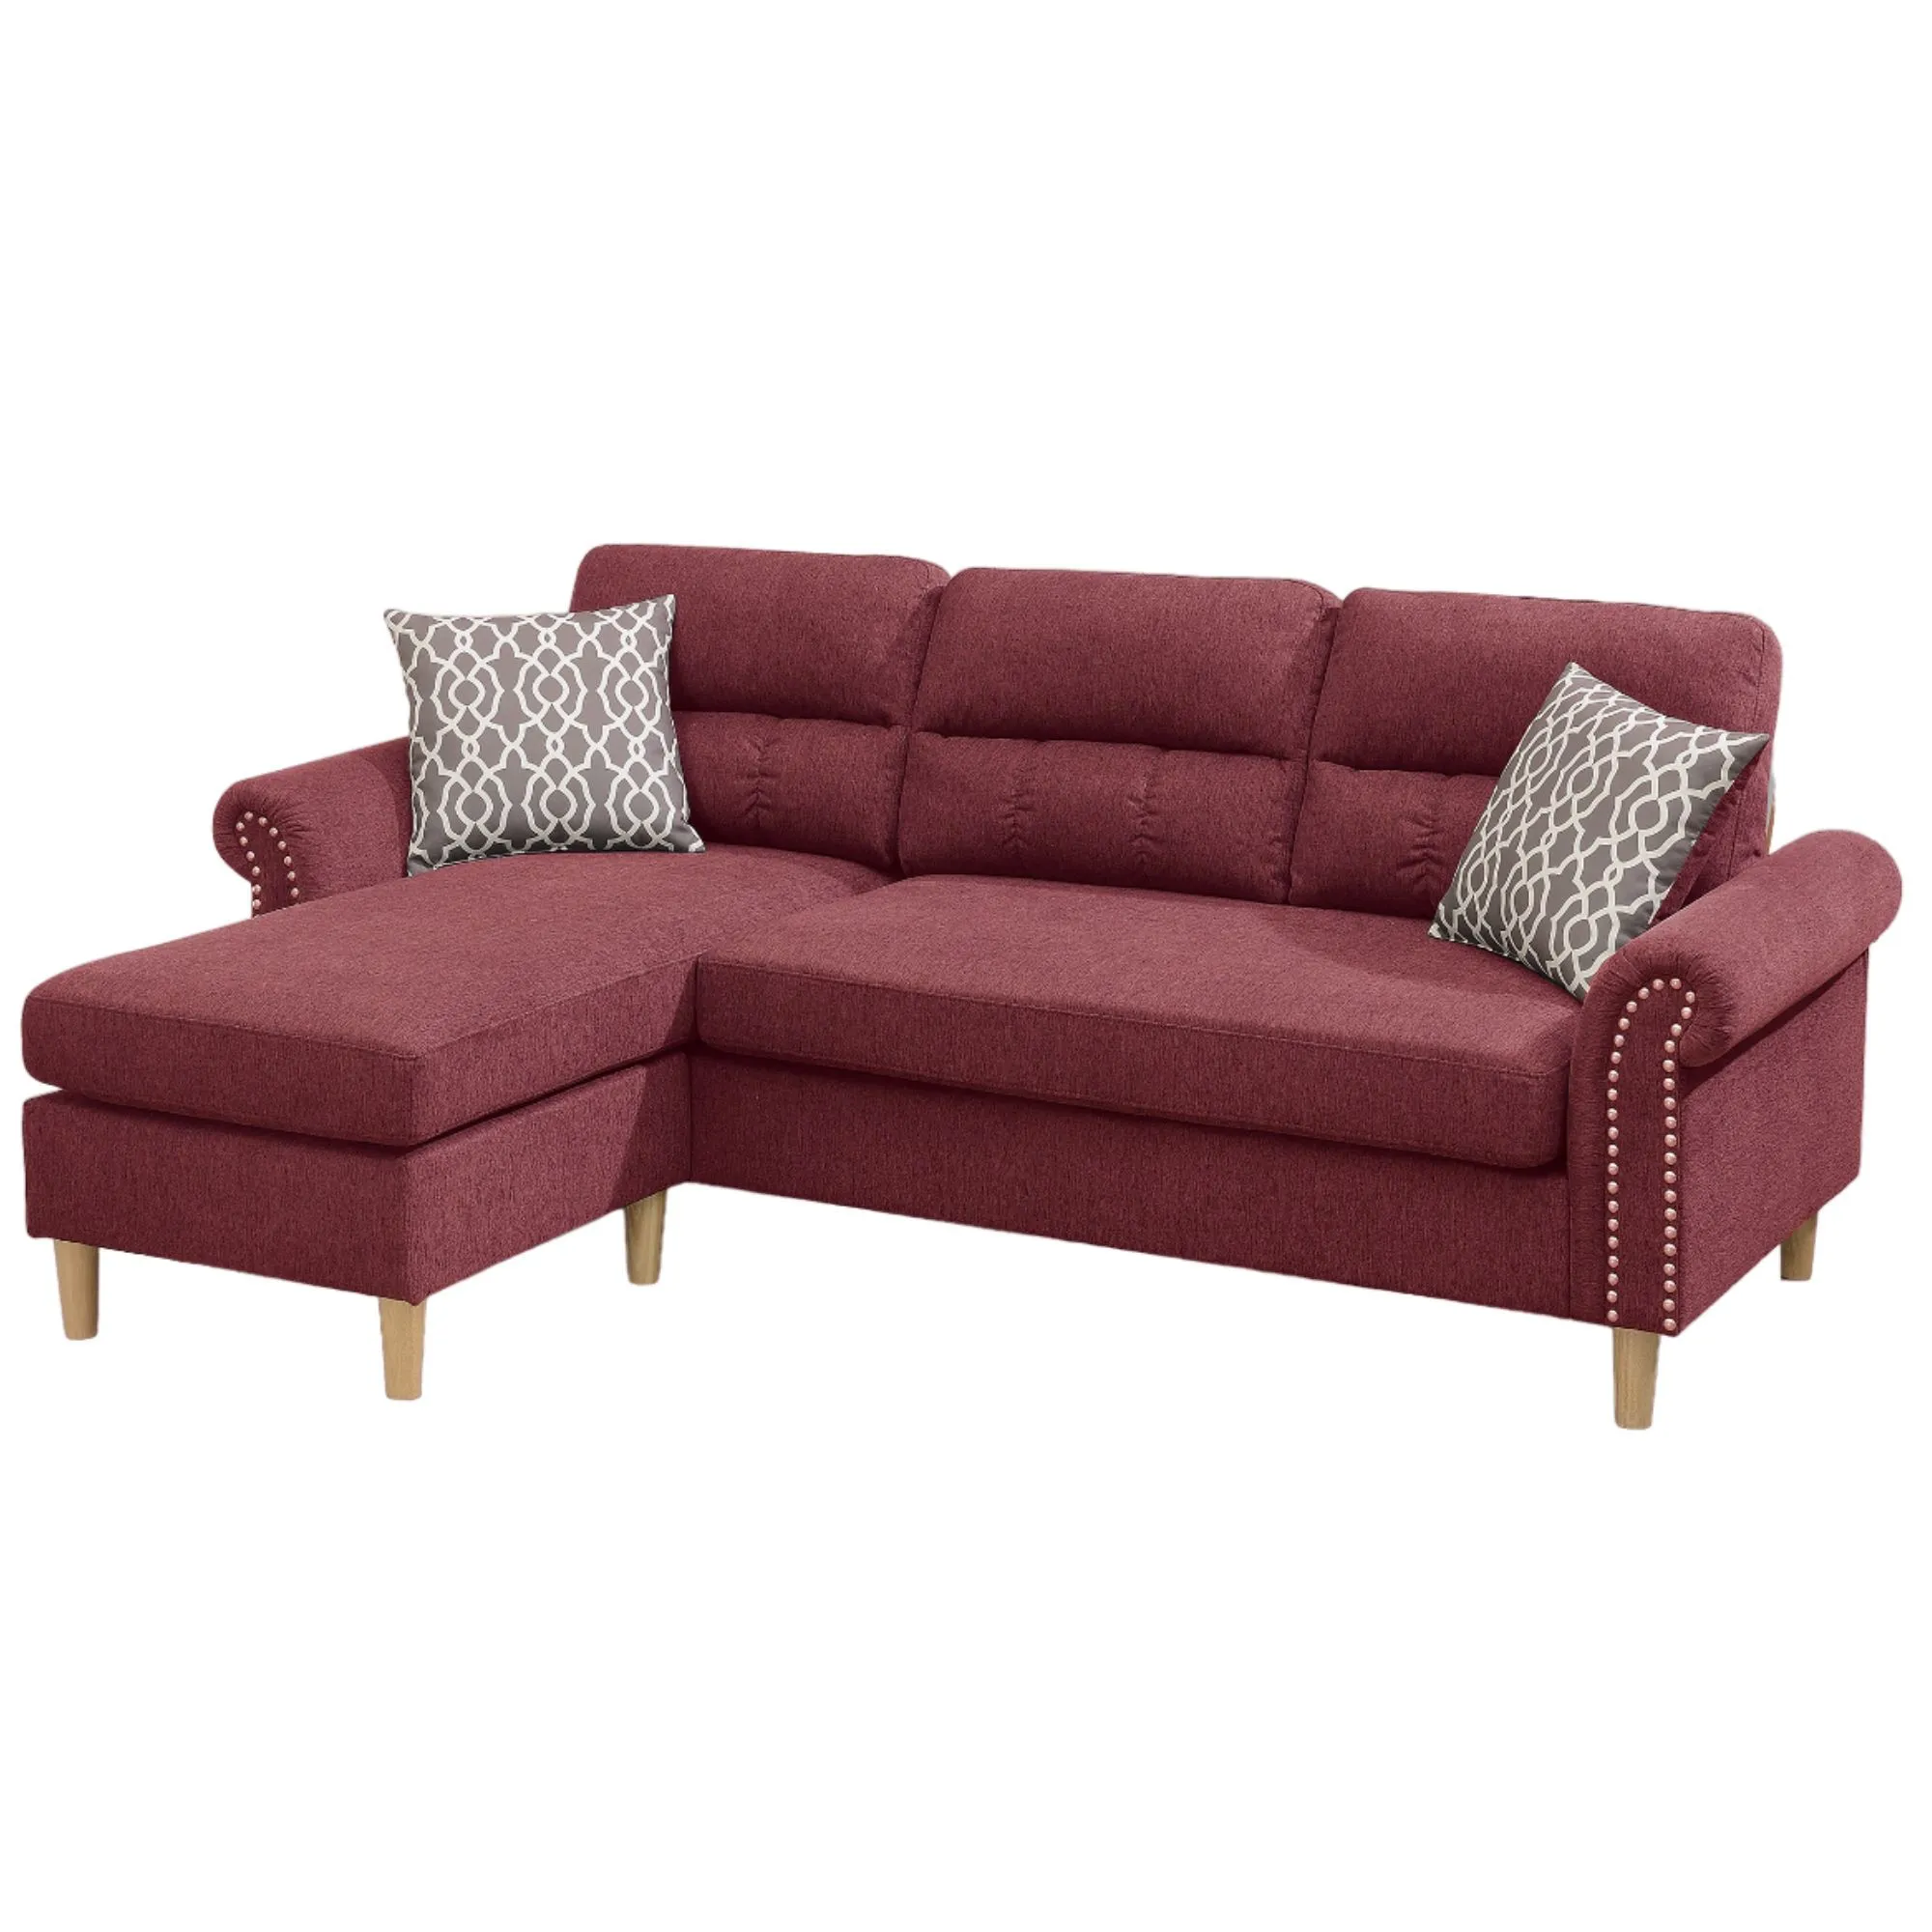 Polyfiber Reversible Sectional Sofa Set with Chaise Pillows Plush Cushion Couch Nailheads